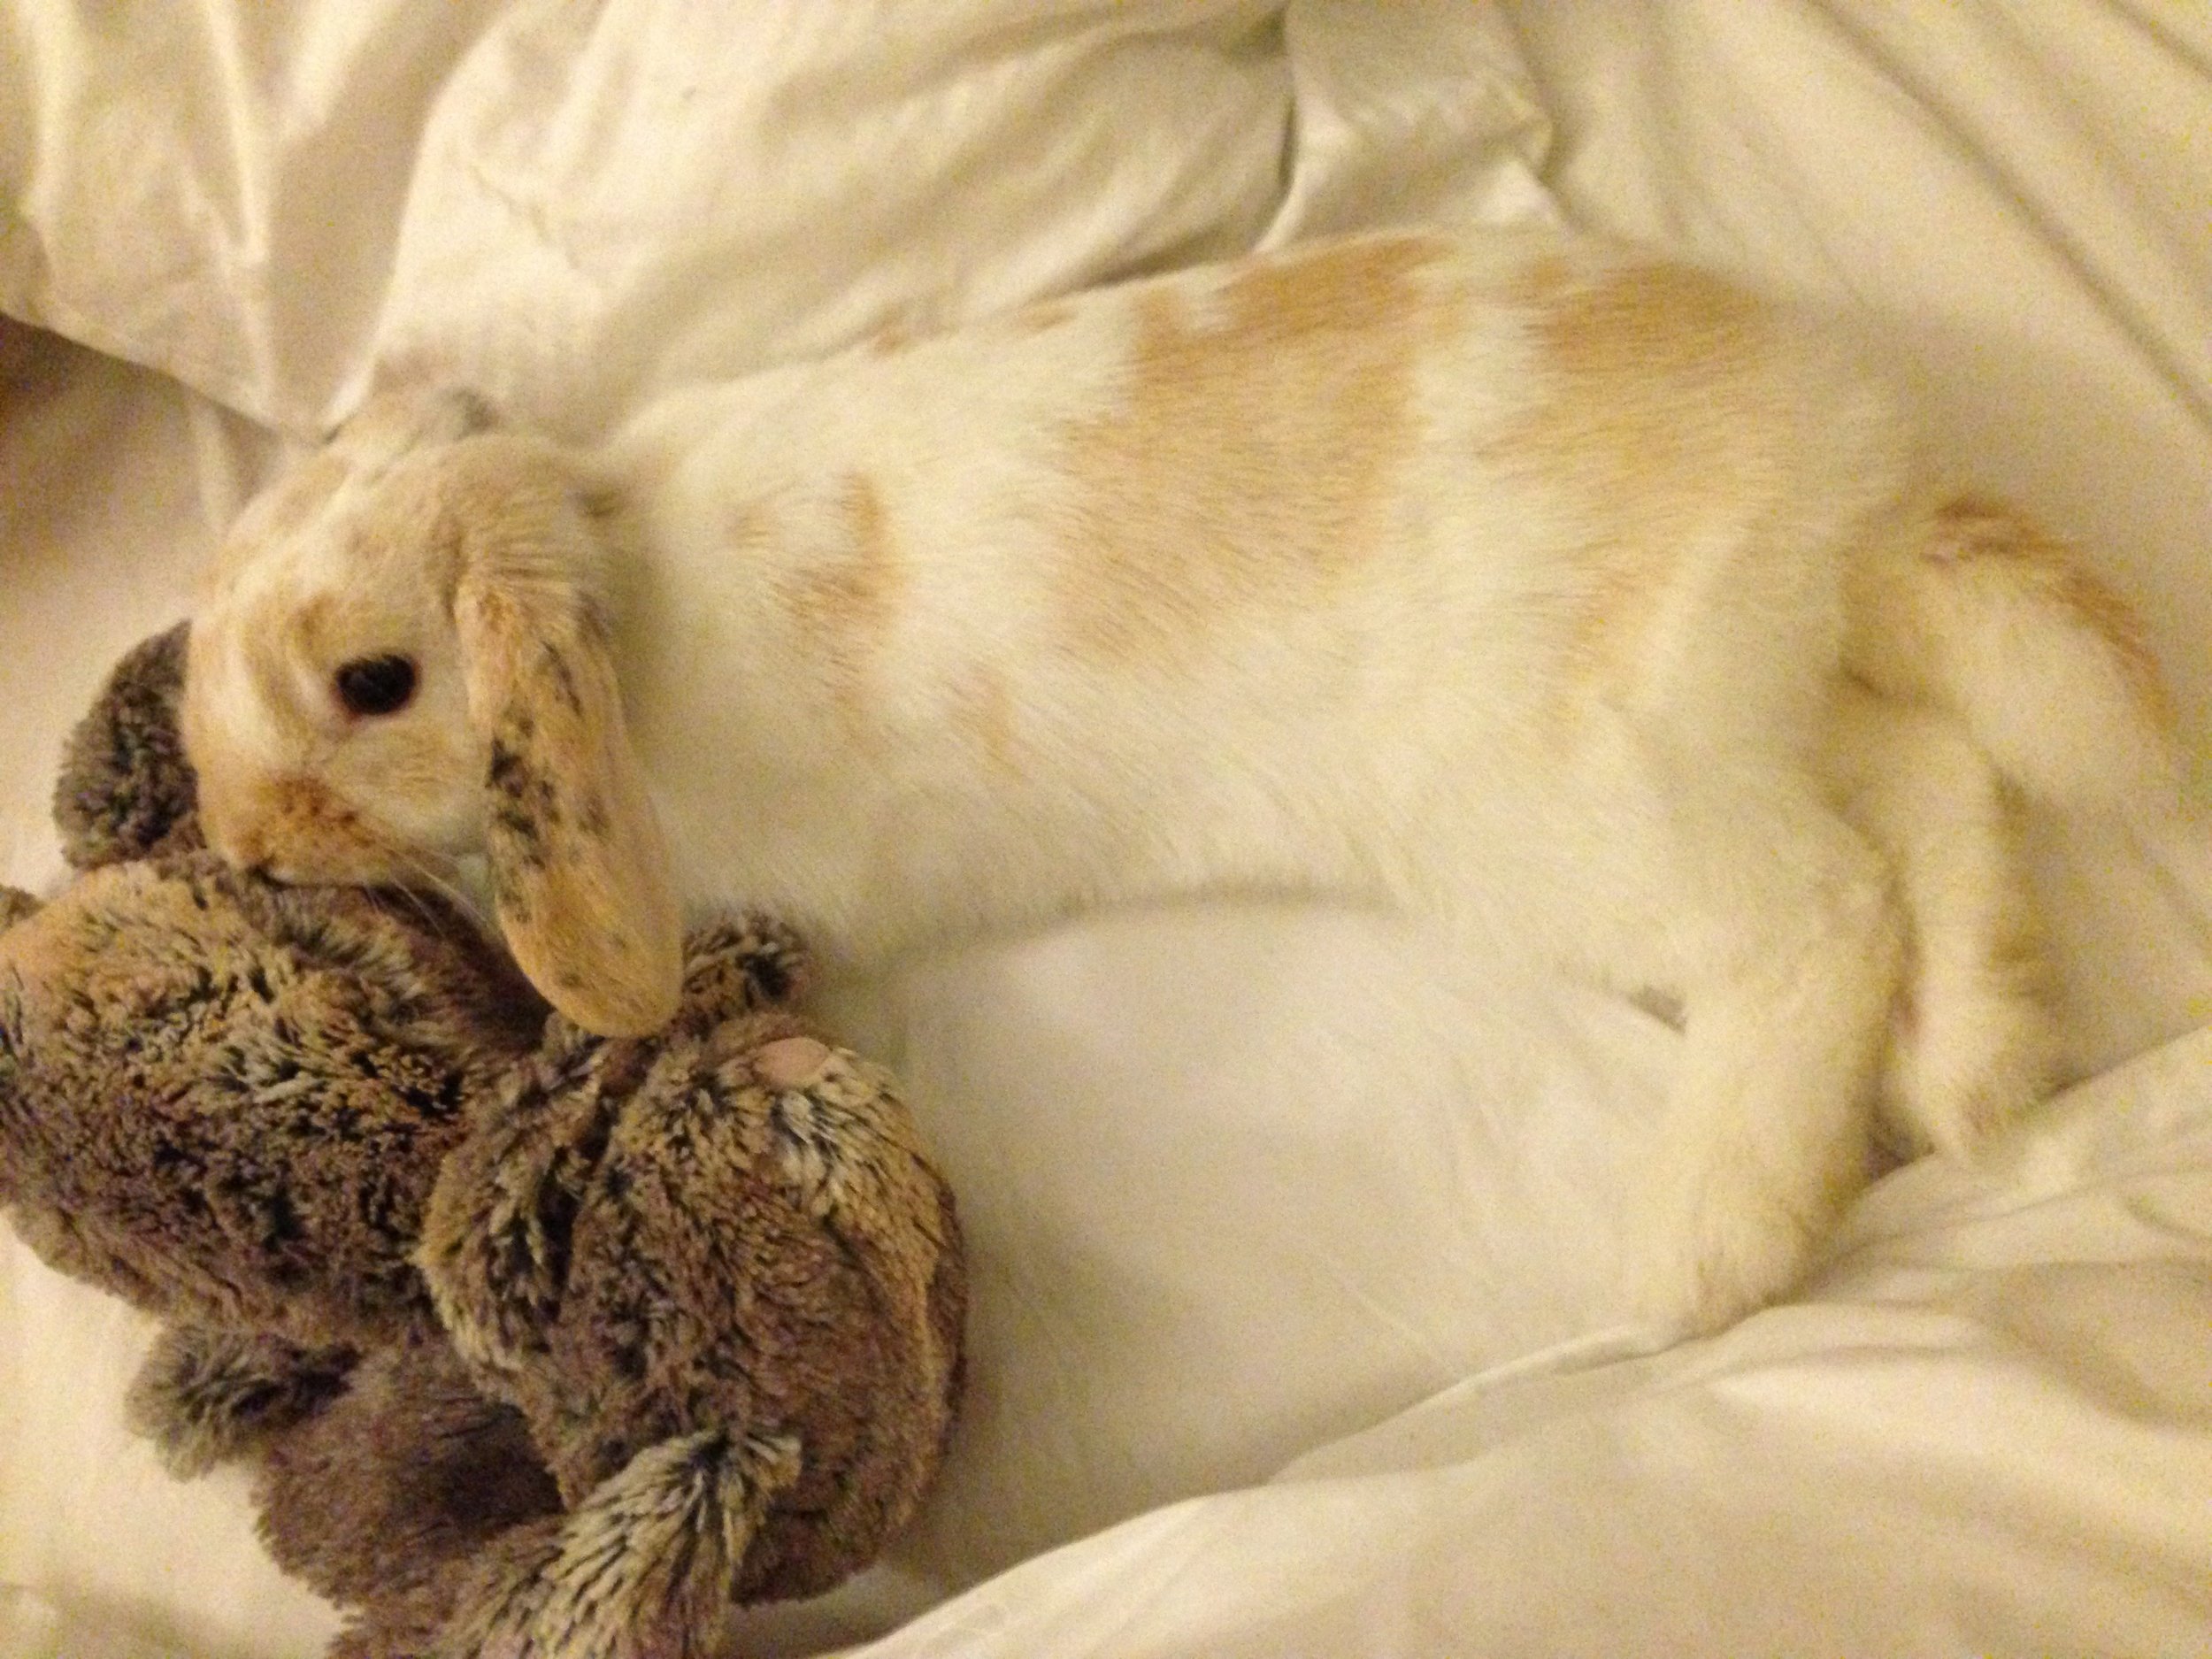 Bunny Hangs Out with Some Plush Friends 3